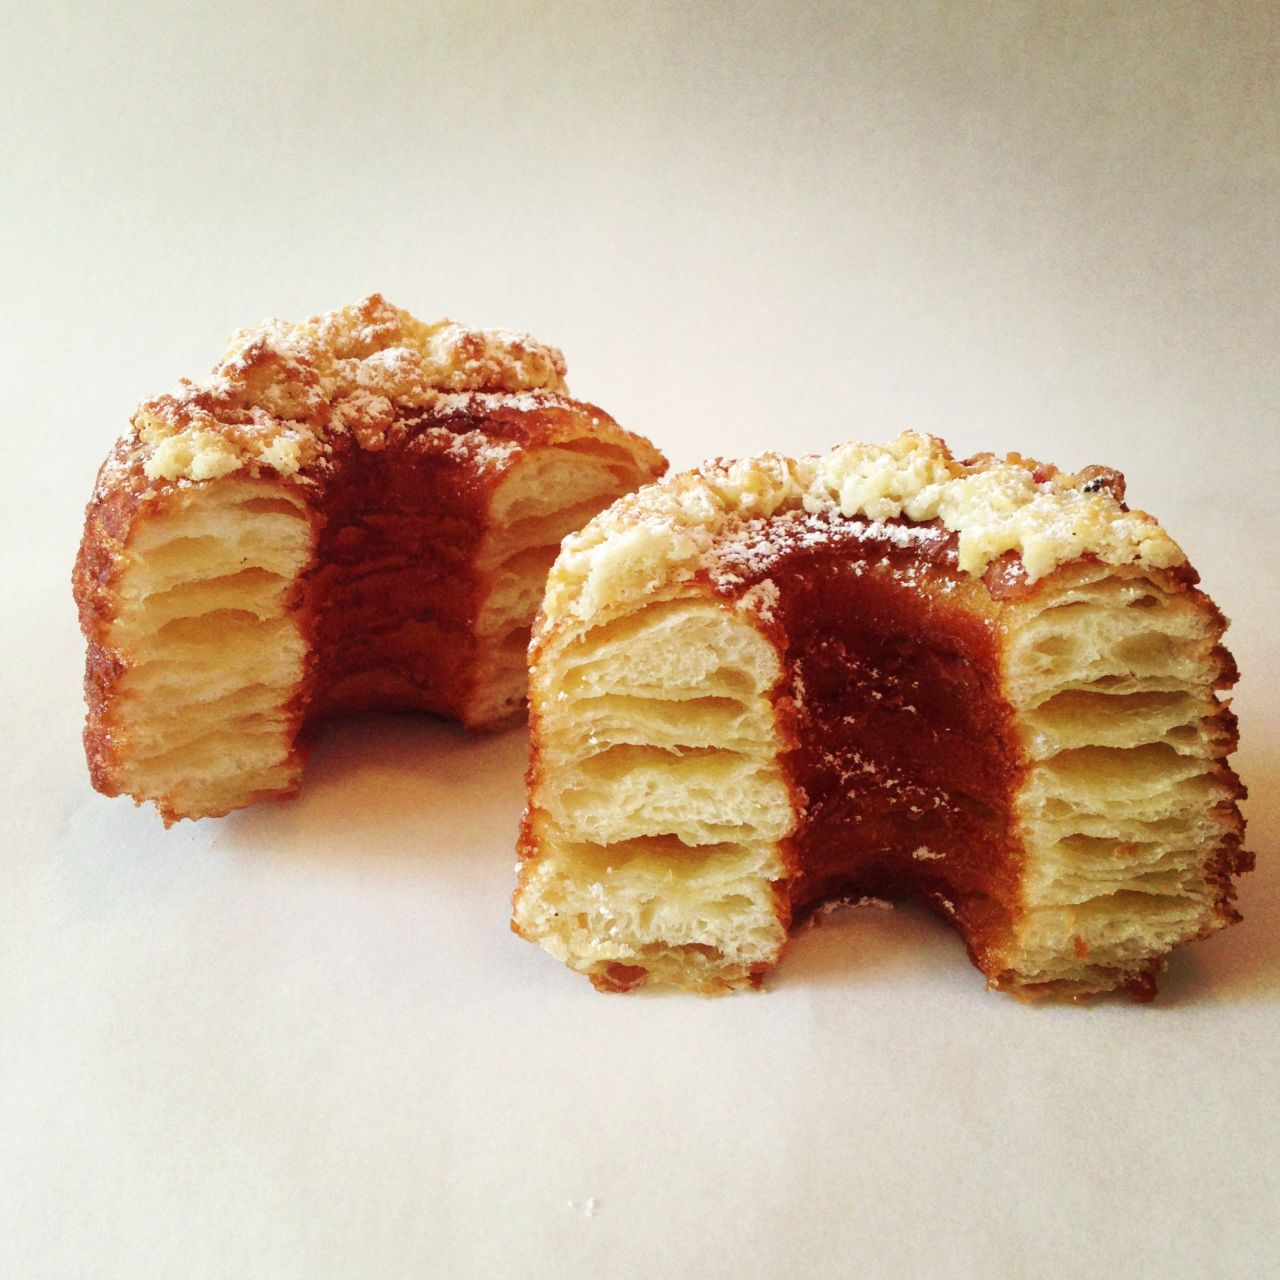 2013 may go down in dining history as the year of the Cronut -- chef Dominique Ansel's doughnut-croissant hybrid that spawned block-wrapping lines and innumerable copycats around the globe. But that wasn't the only thing the food world cooked up this year. Here's a look back at the biggest stories of the past 12 months.